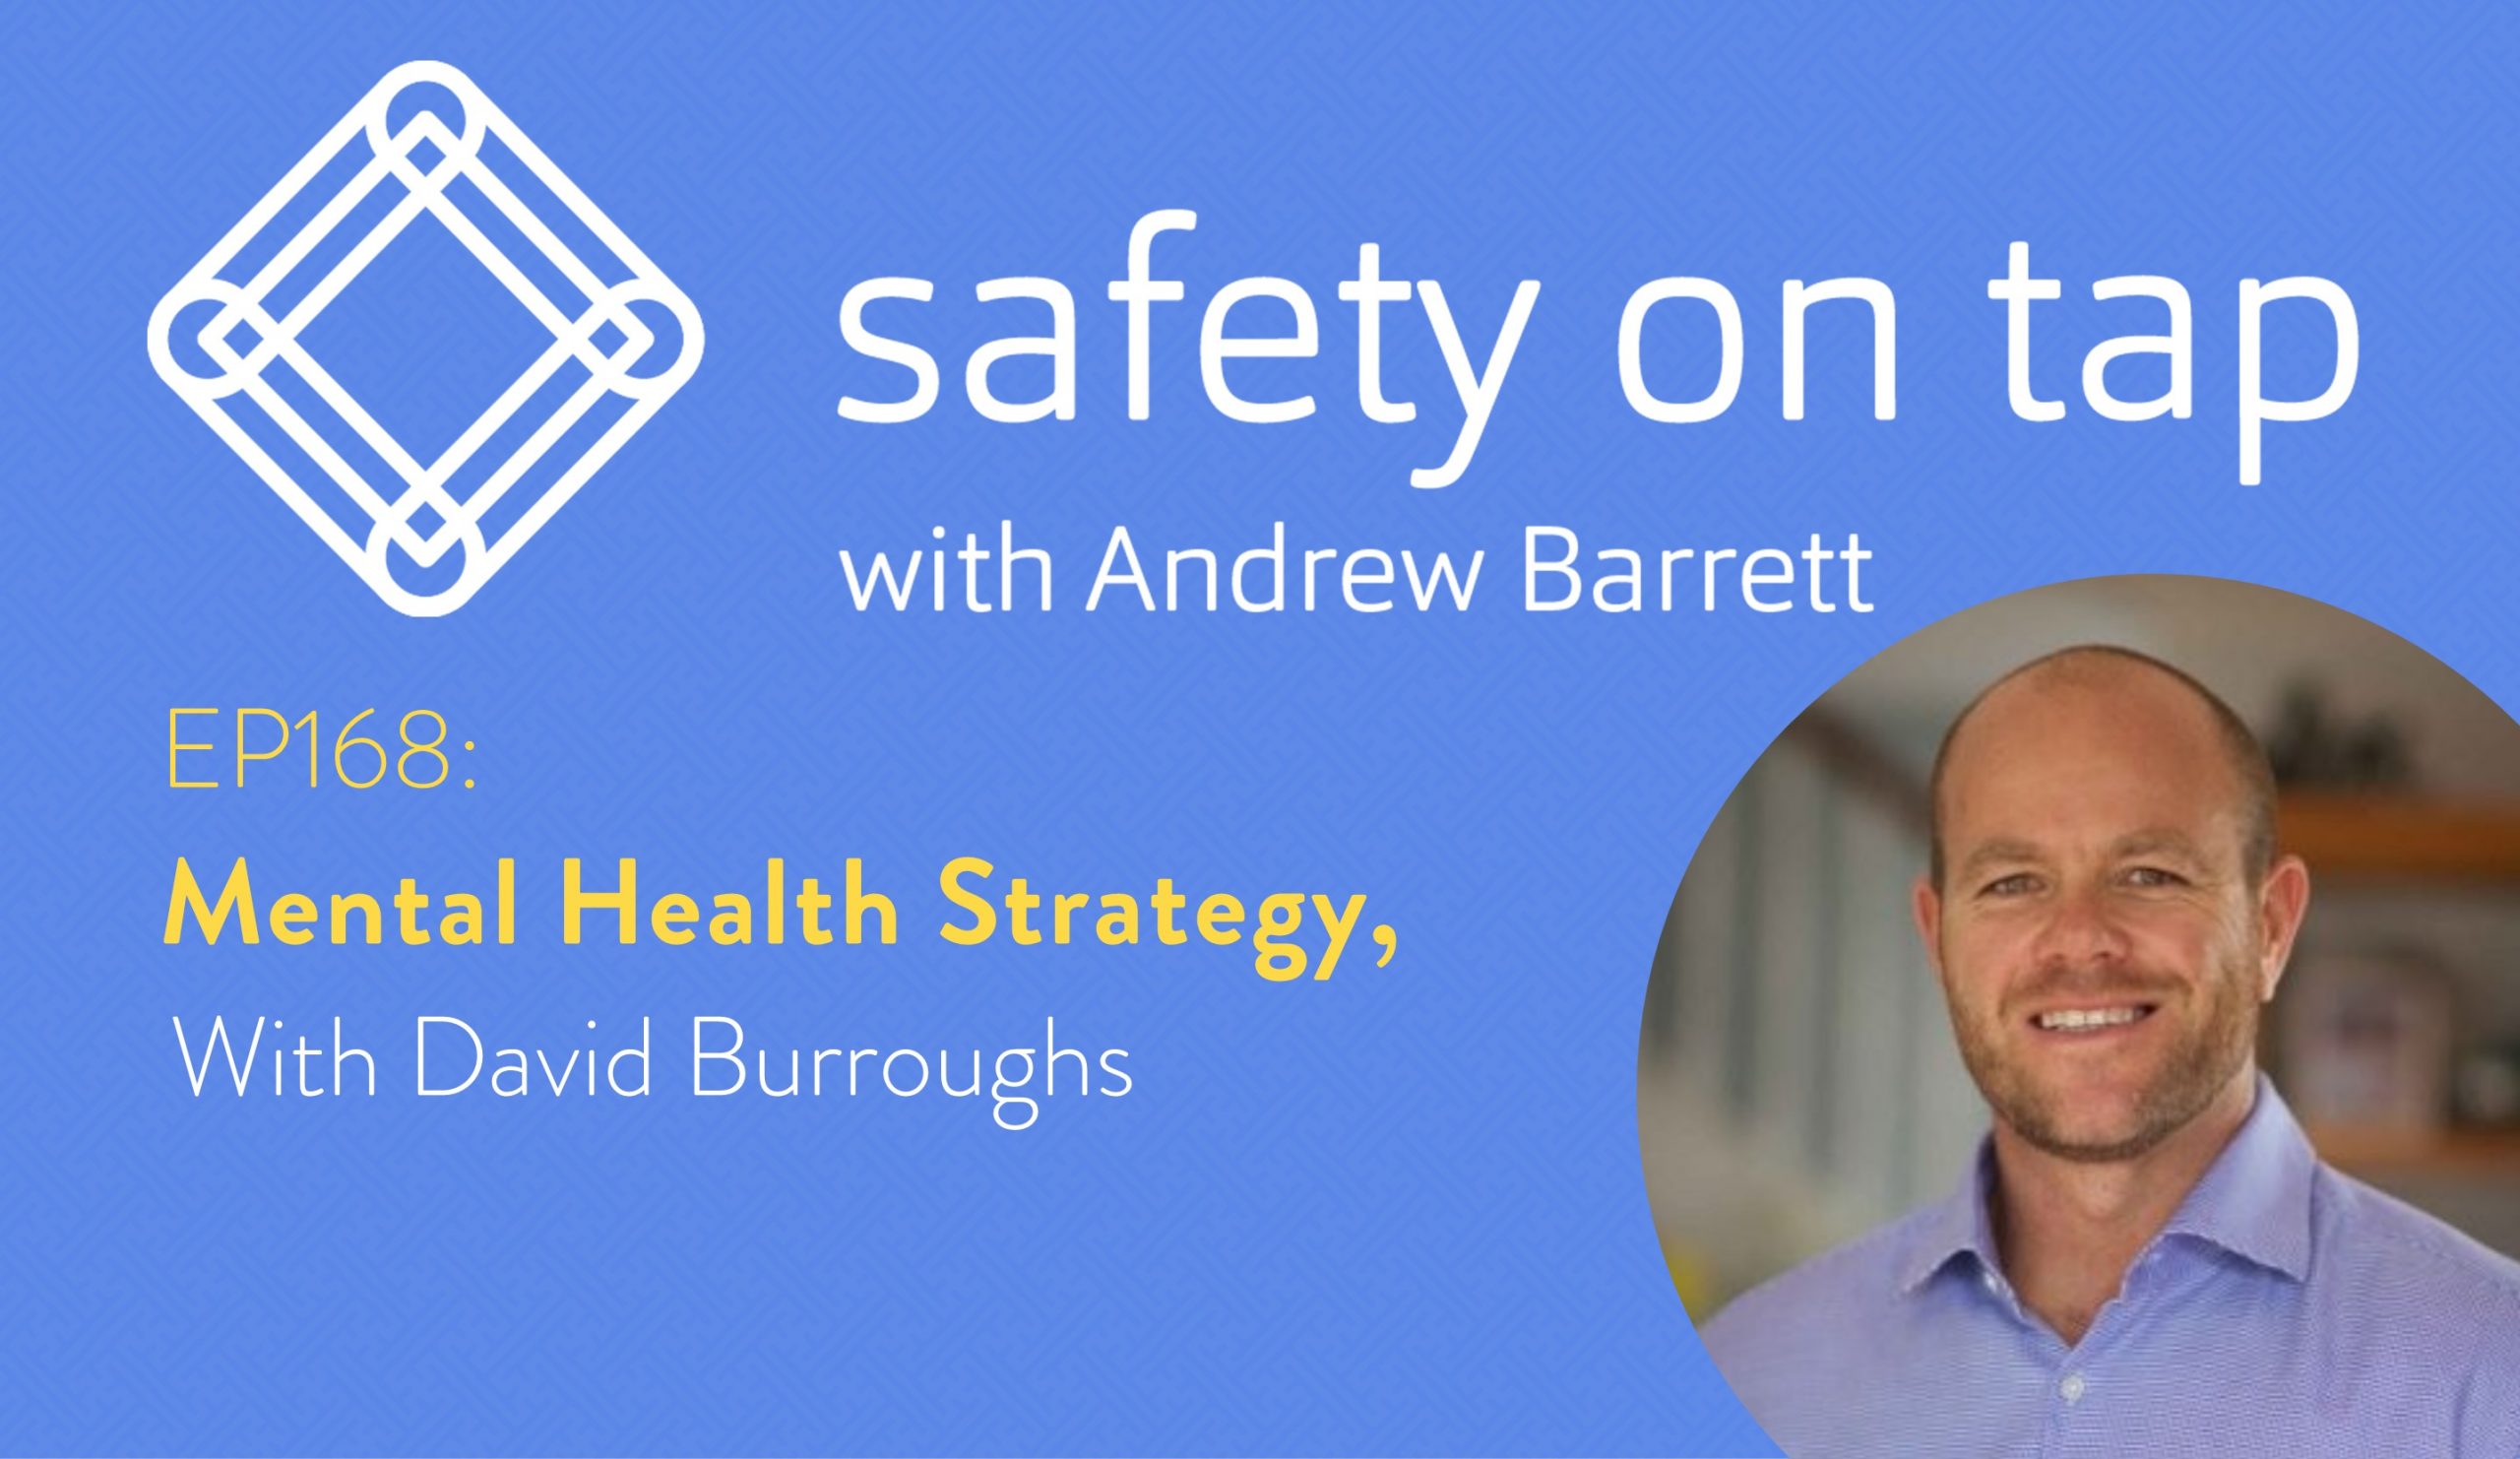 Ep168 Mental Health Strategy, with David Burroughs